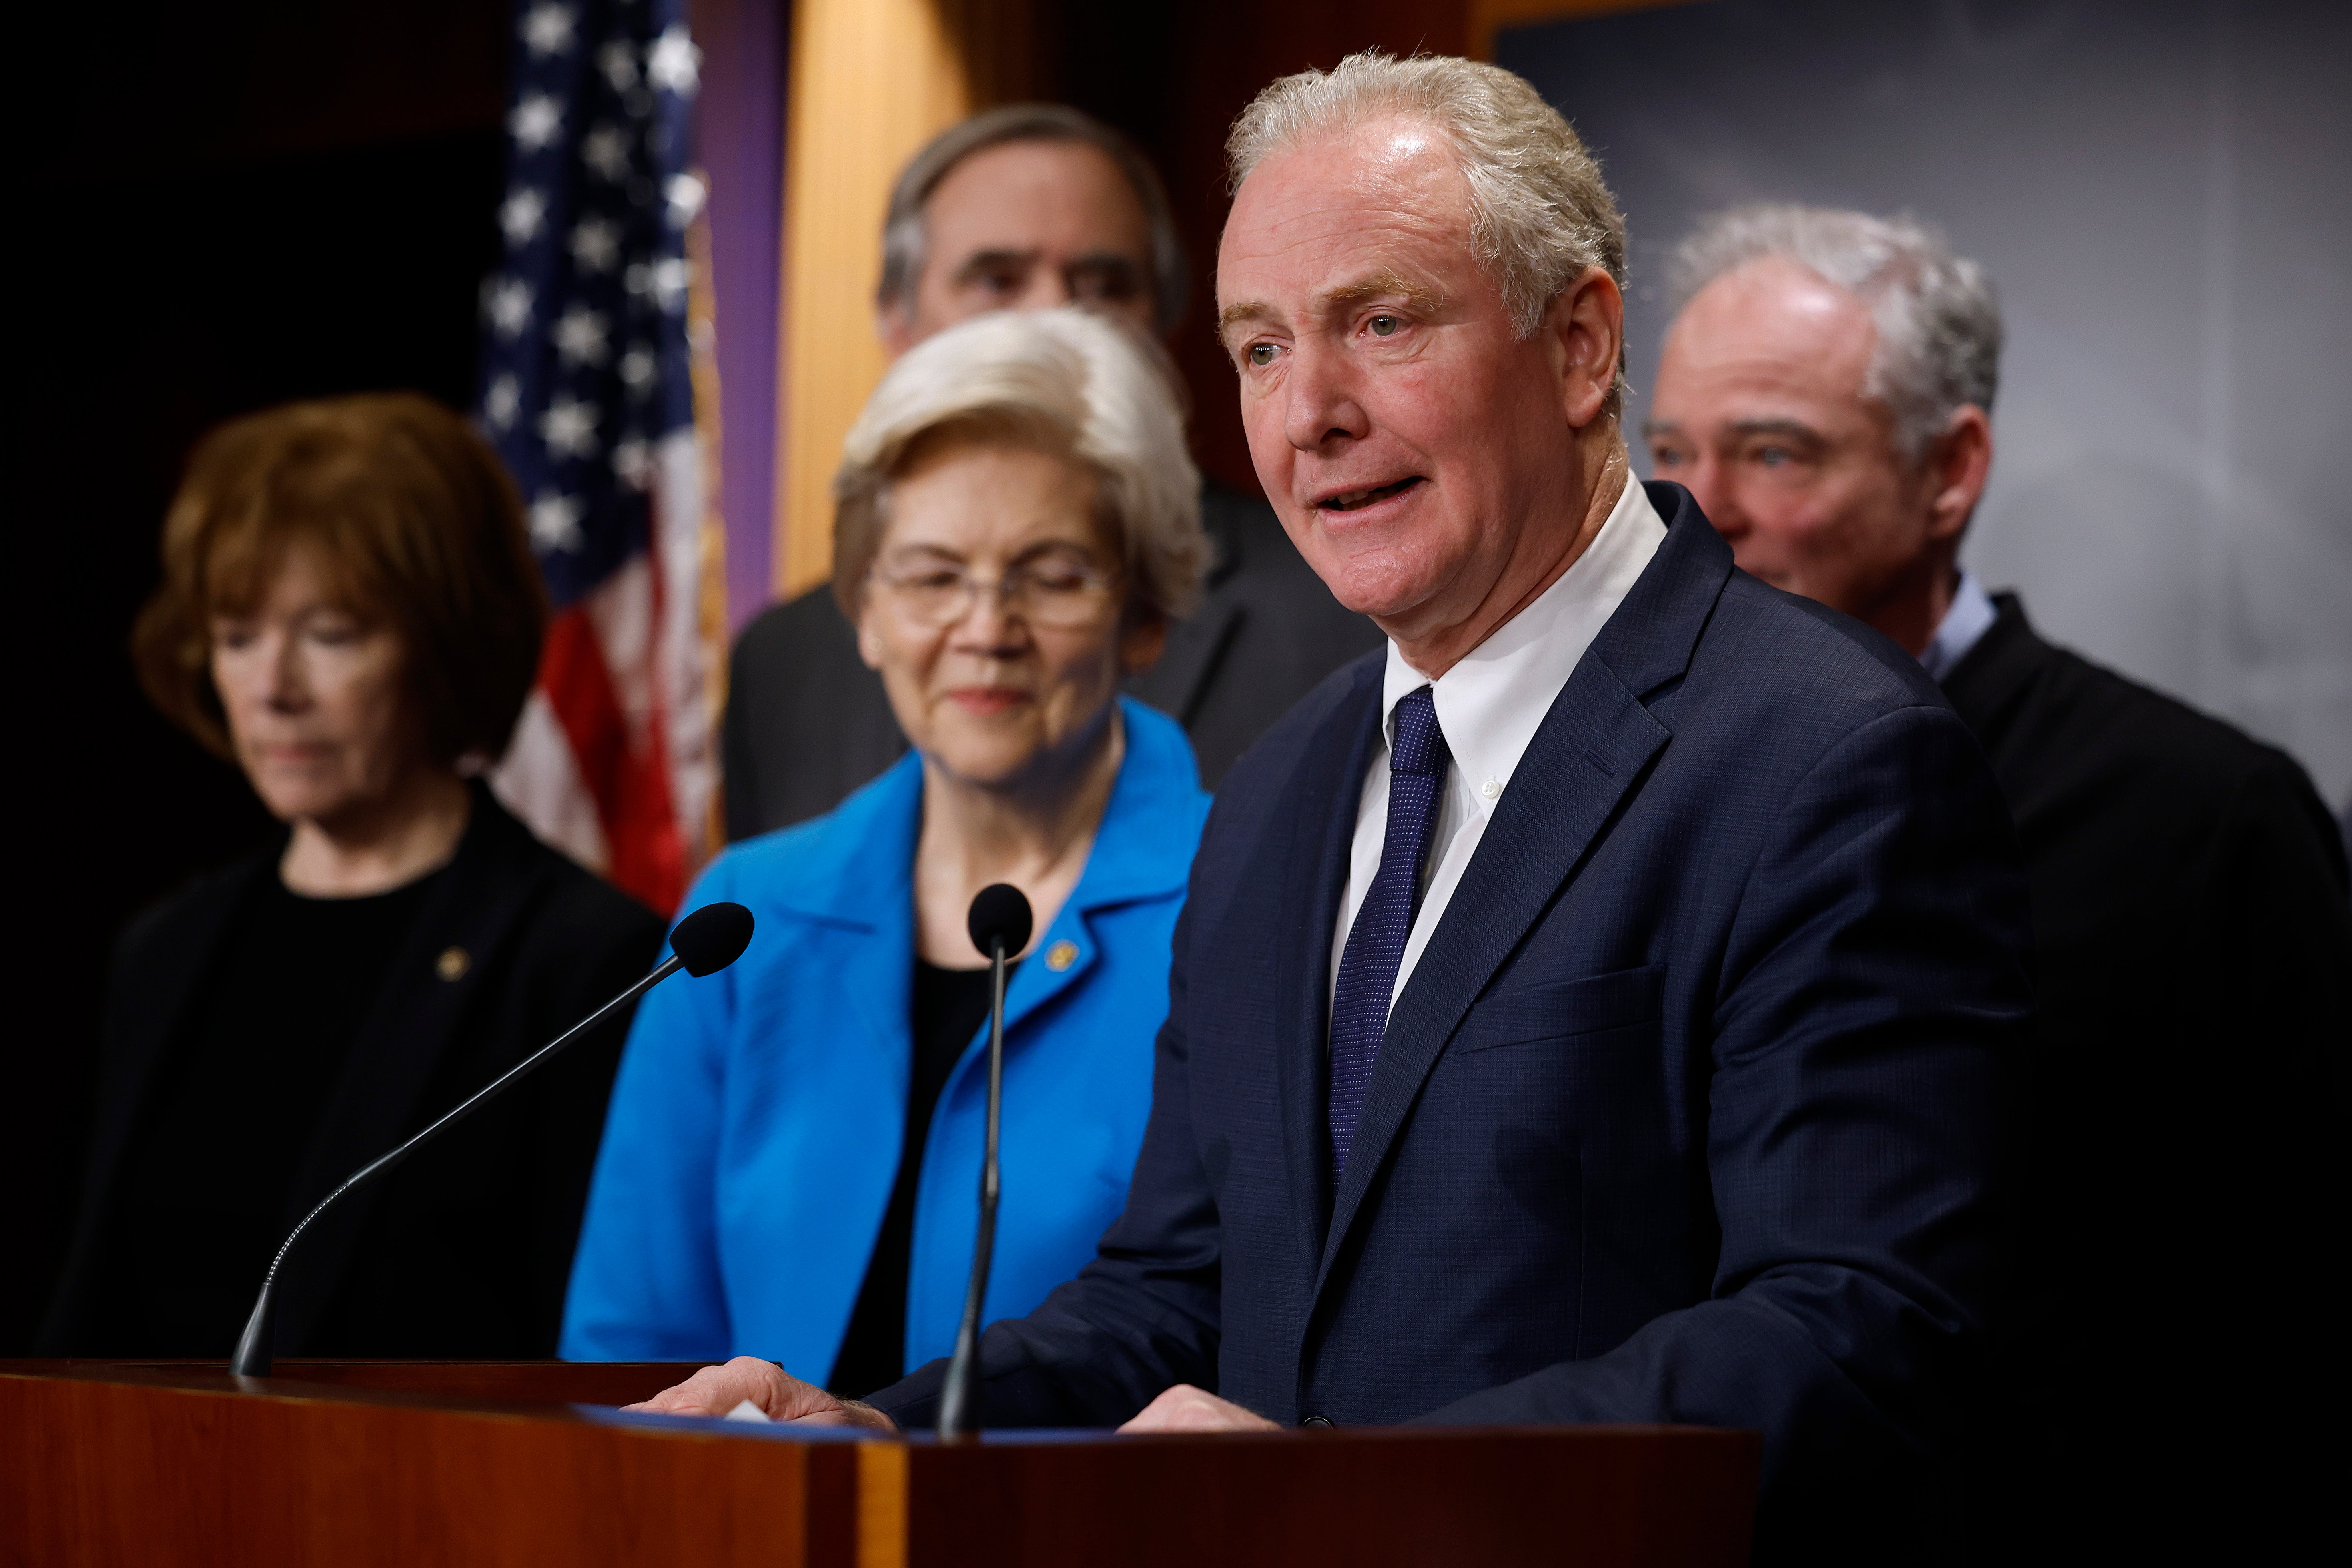 Sen. Chris Van Hollen (D-MD) (C) is one of only a handful of senators who supports a ceasefire between Israel and Hamas. (Photo by Chip Somodevilla/Getty Images)